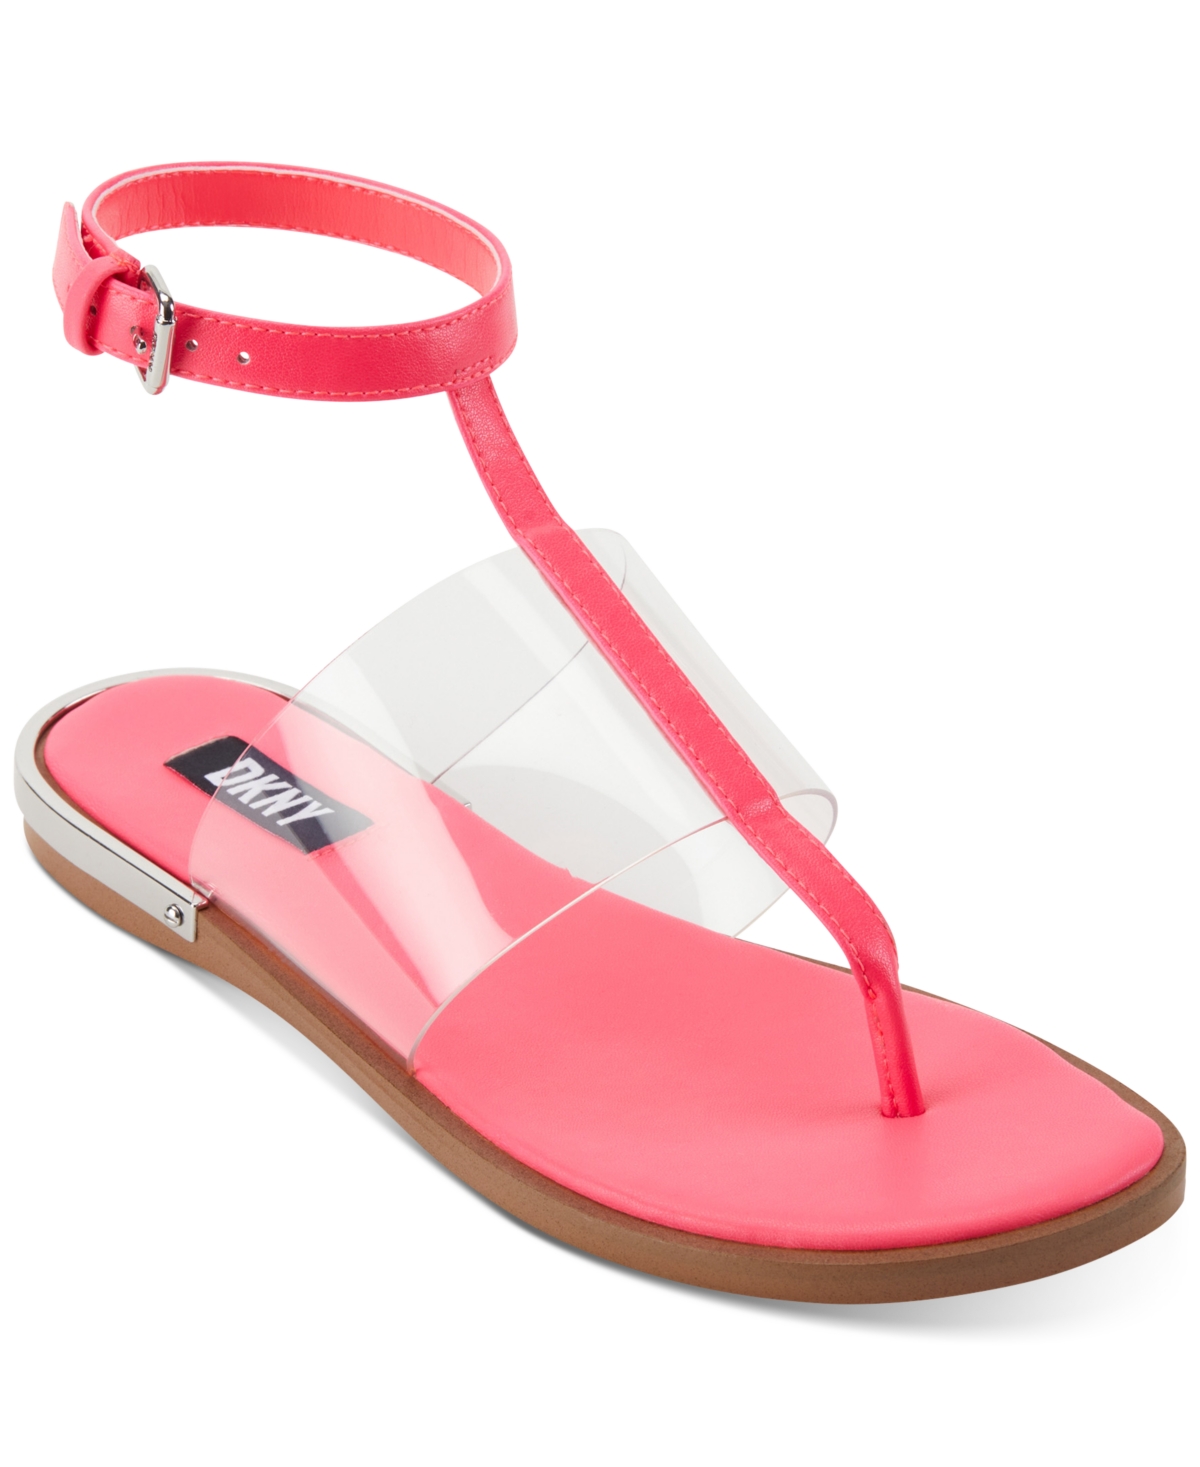 DKNY WOMEN'S AVA ANKLE-STRAP SANDALS